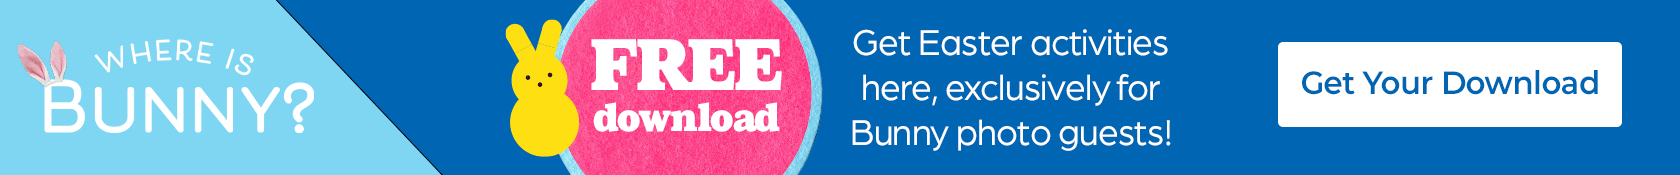 Download free Easter activities exclusively for Bunny photo guests.